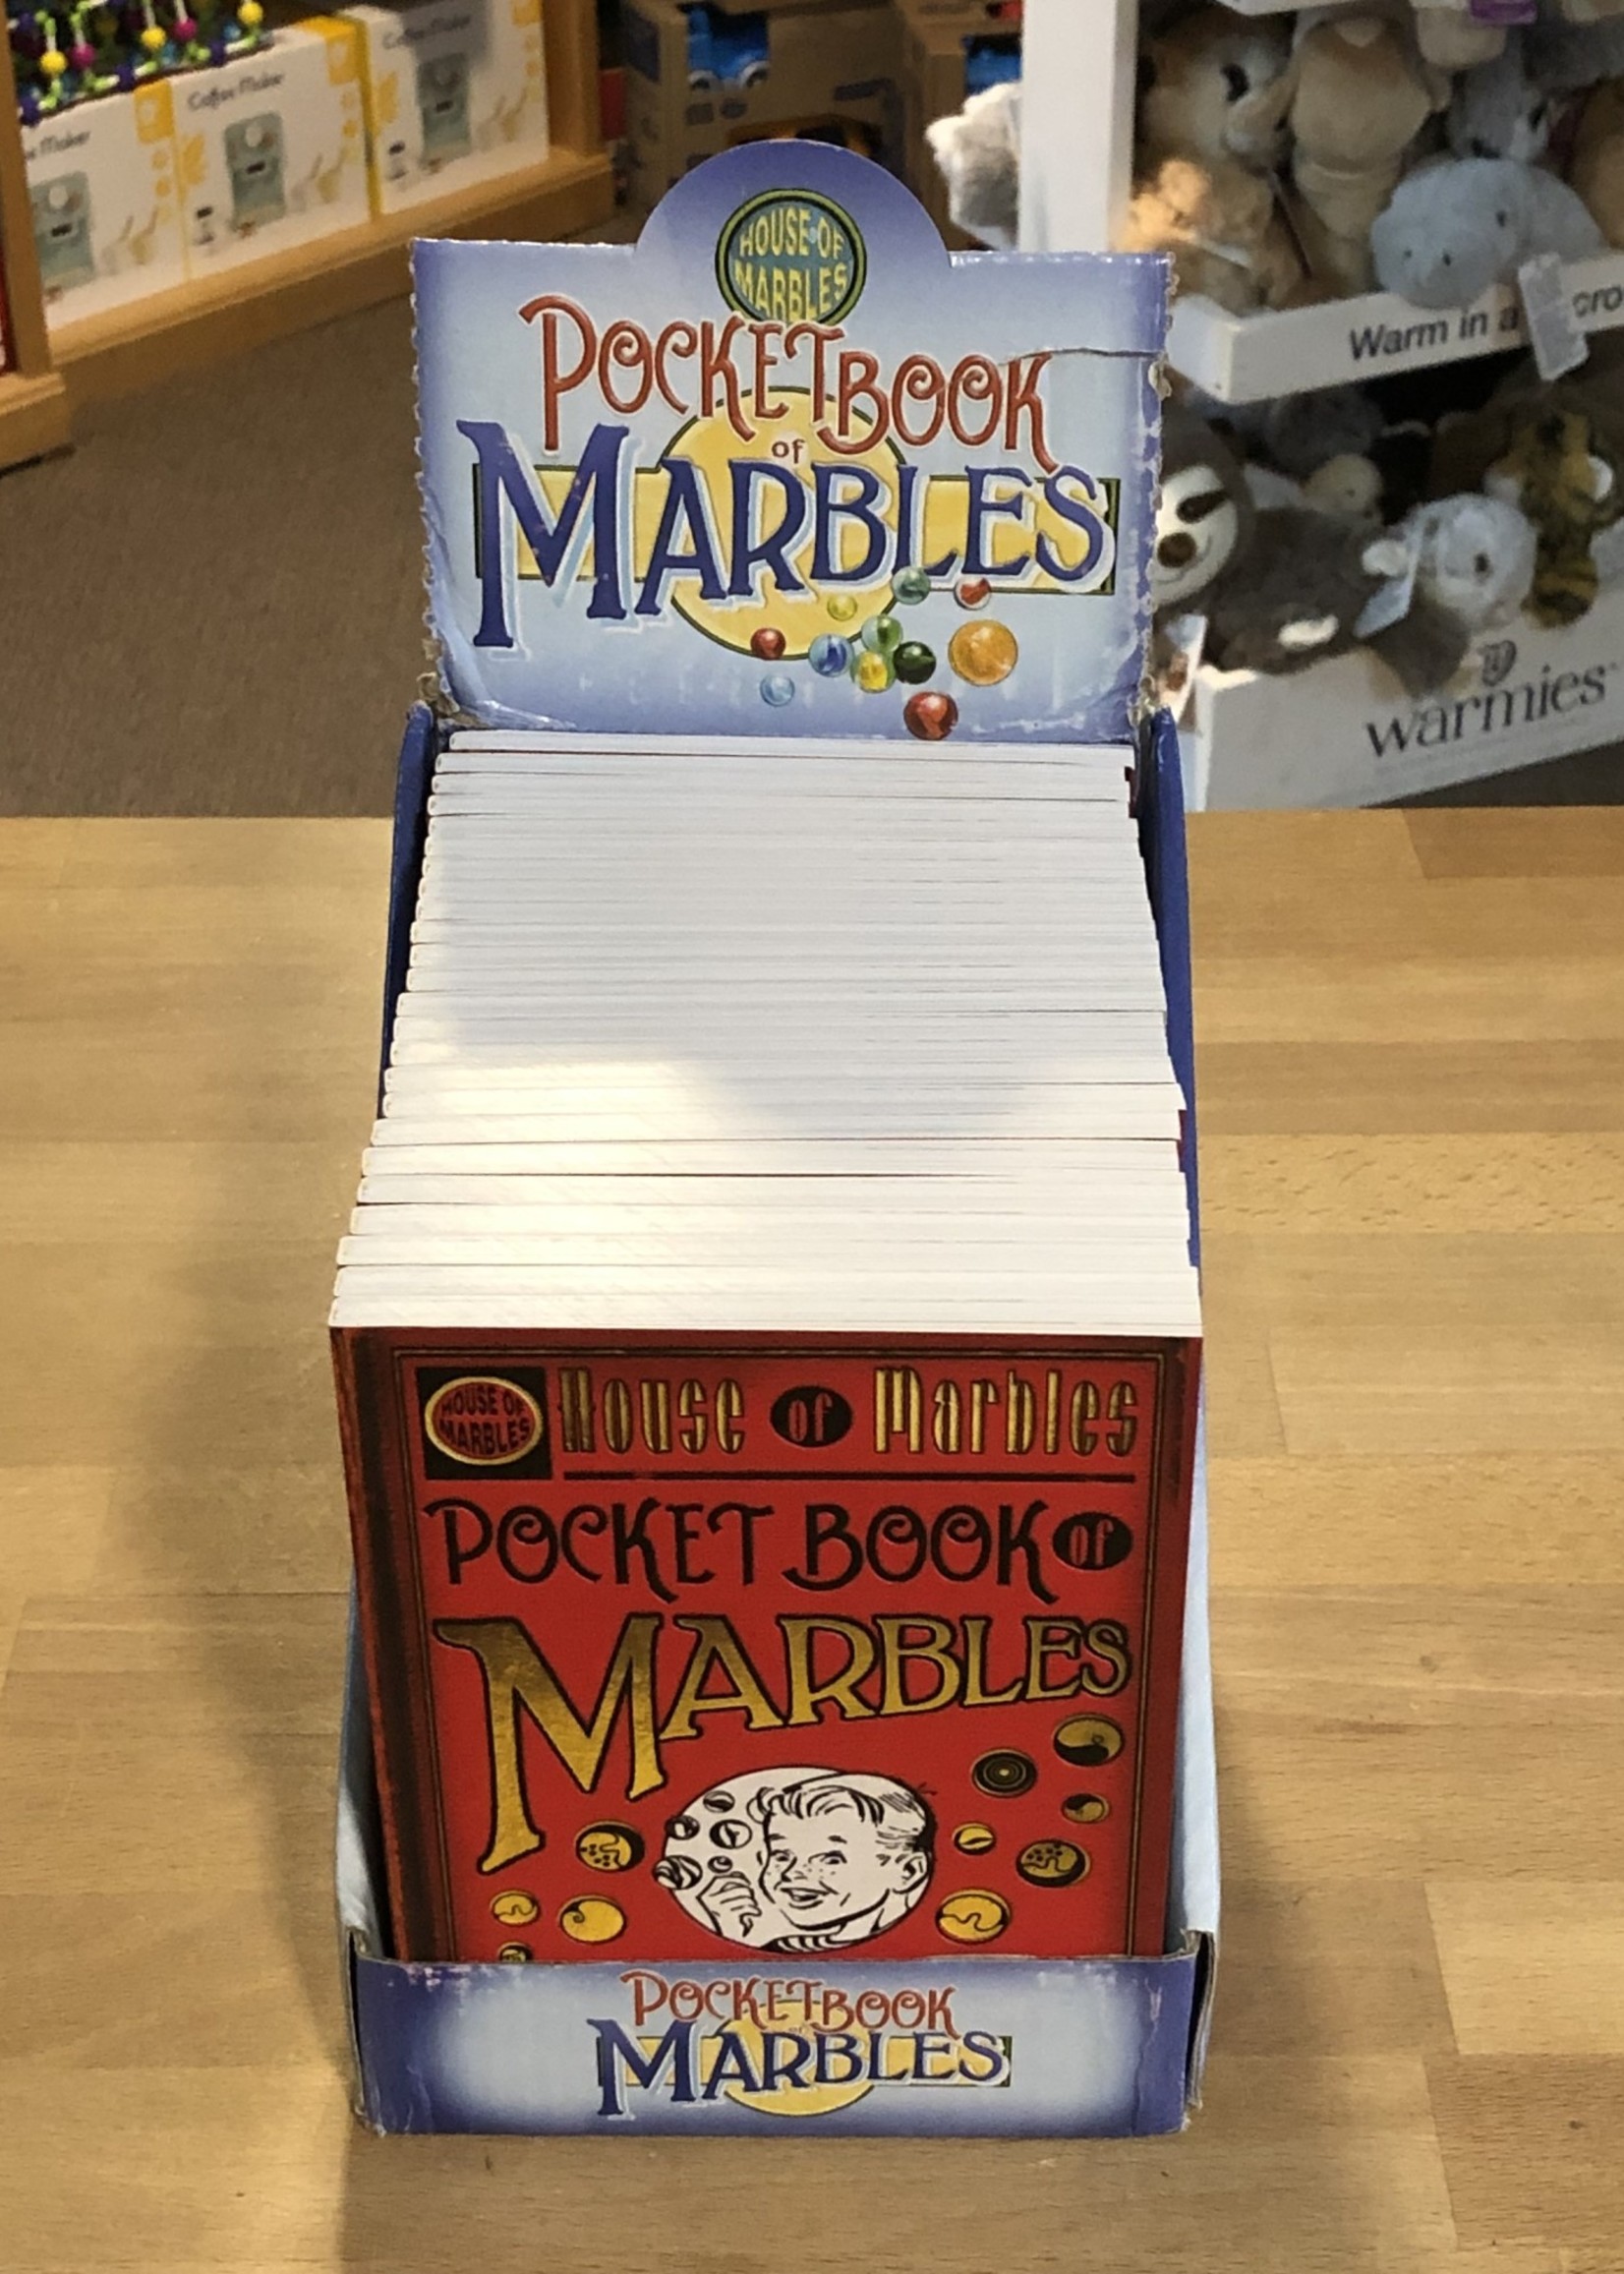 Pocket Book of Marbles